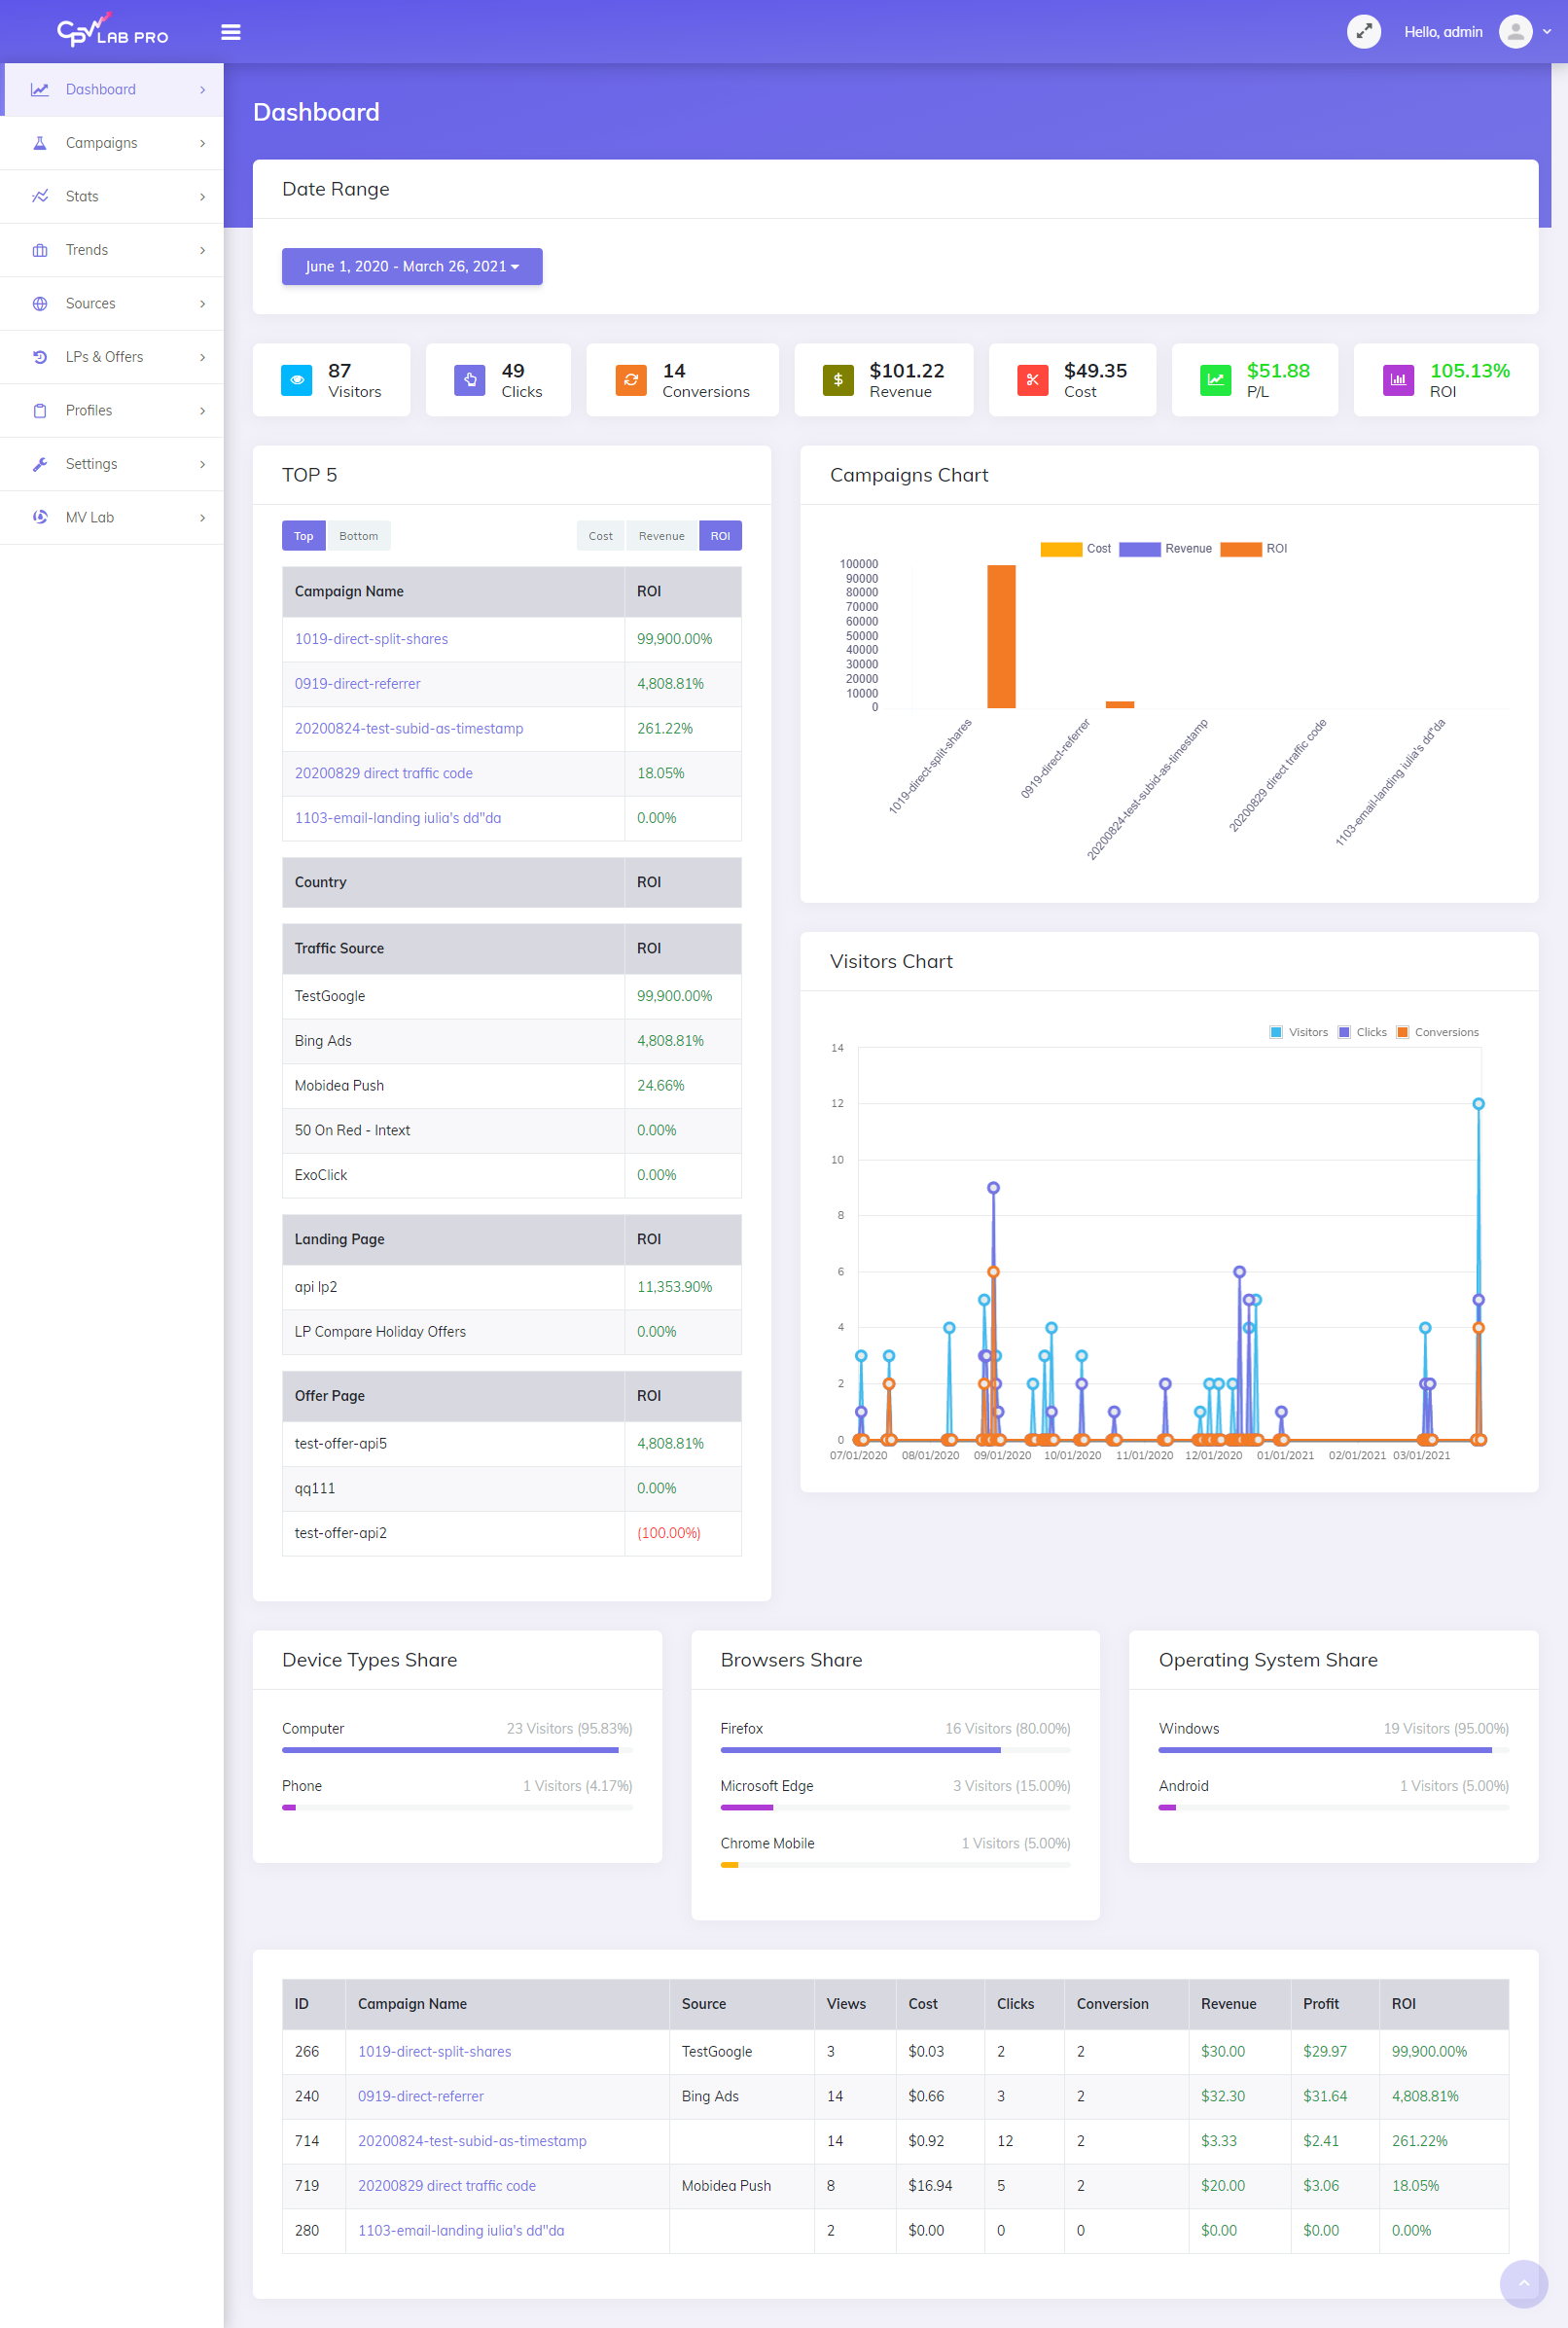 Dashboard - see all the important metrics in one glance